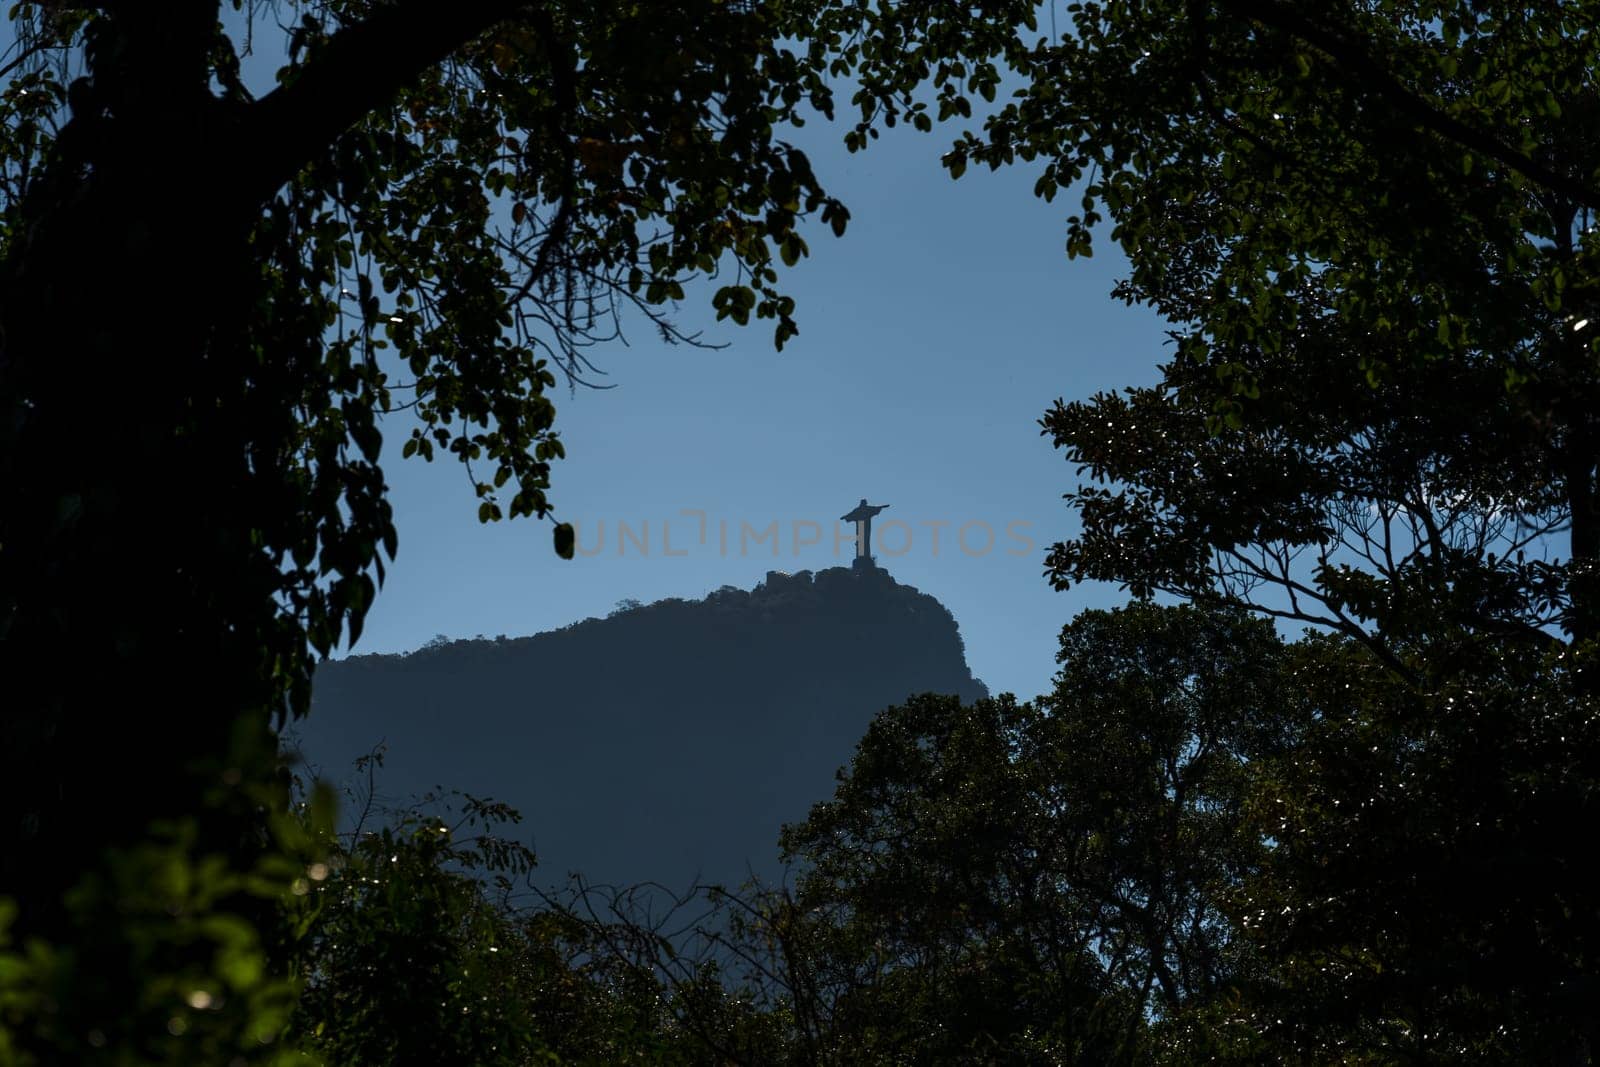 Silhouette of Christ the Redeemer in Rio framed by greenery.